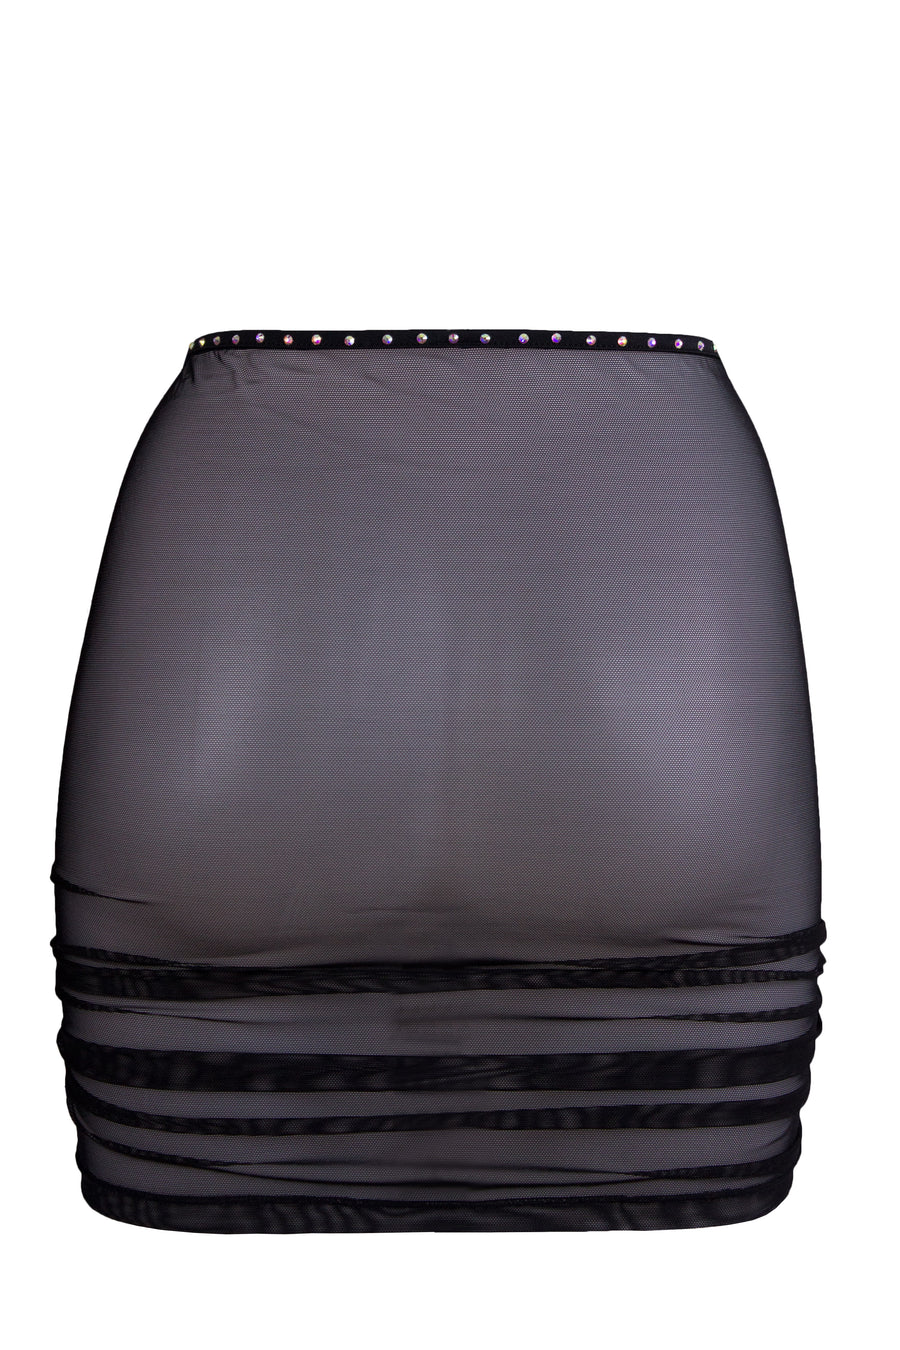 Rhinestone Mesh Skirt Cover-up / Drawstring Ruched Skirt / Crystals RUCHED BLACK